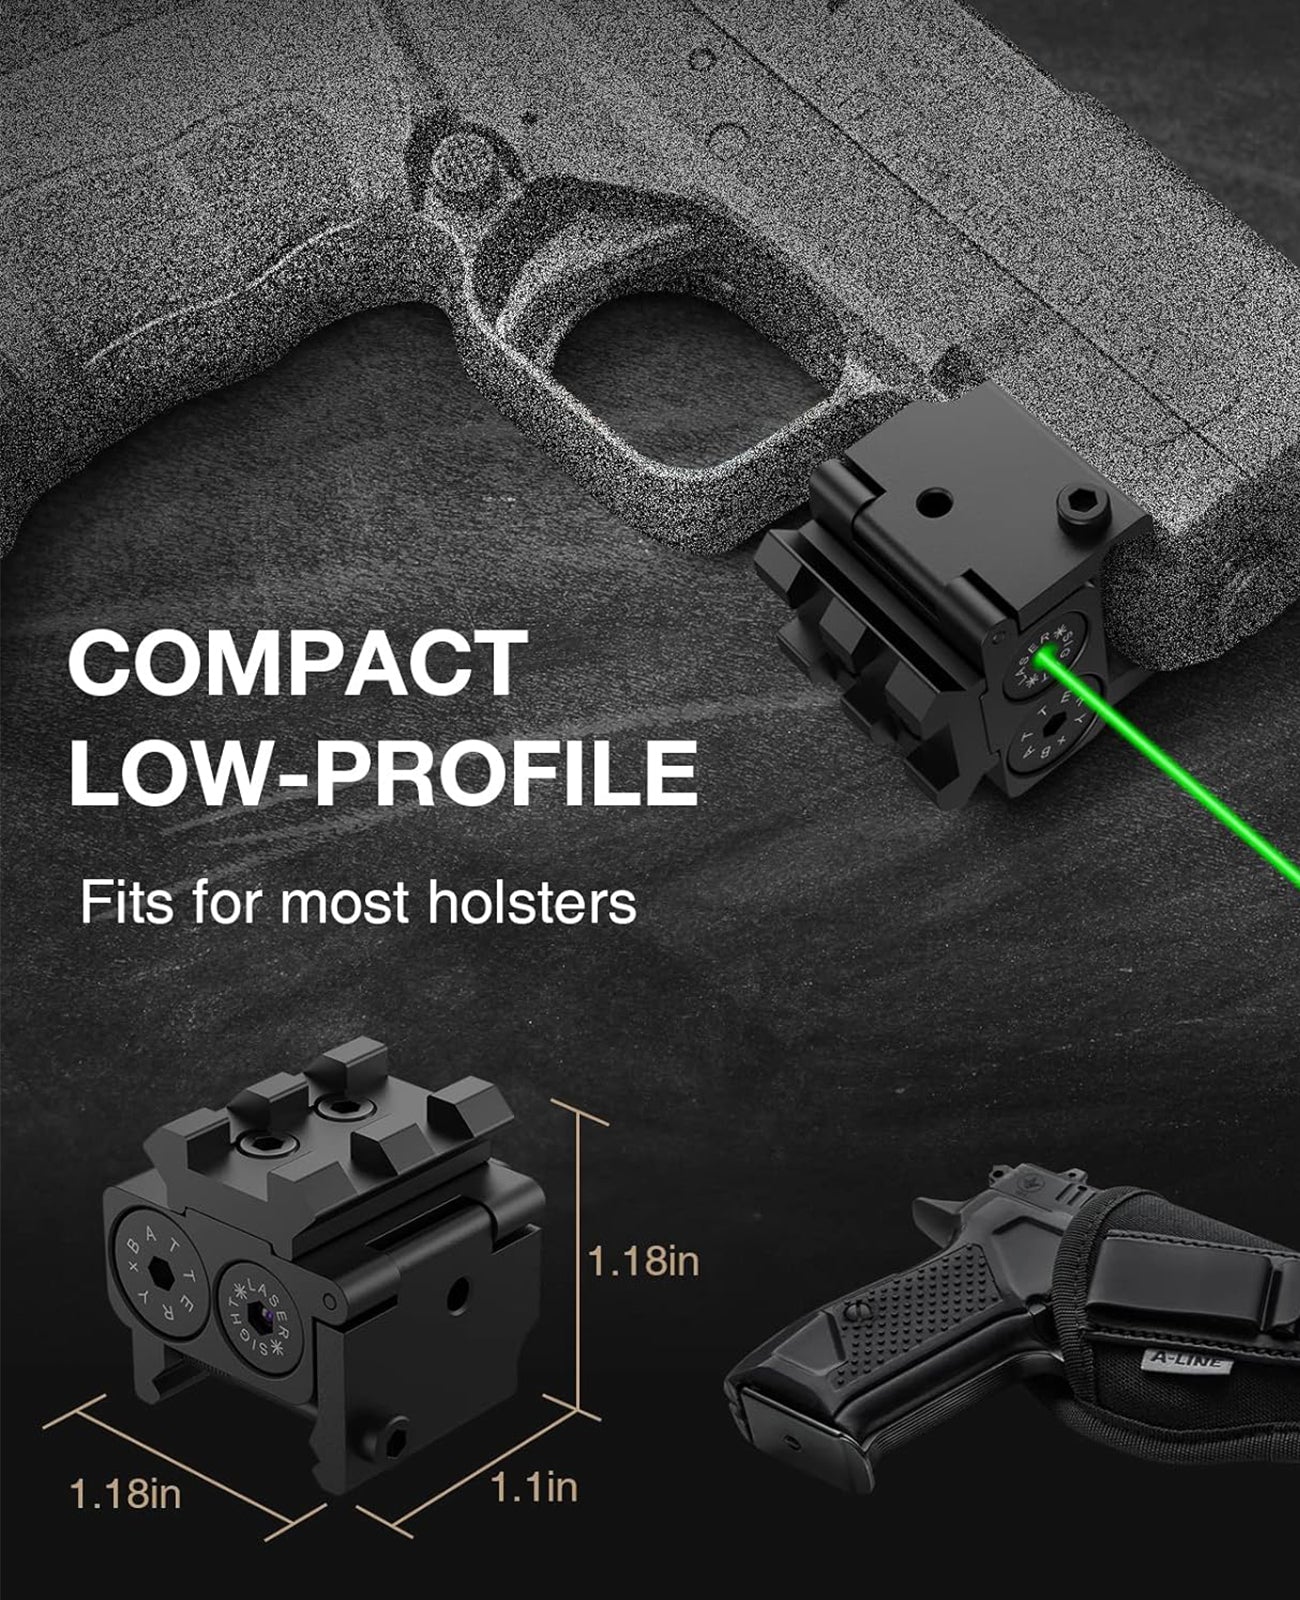 Compact Low Profile Compact Rifle Gun Laser for Pistol